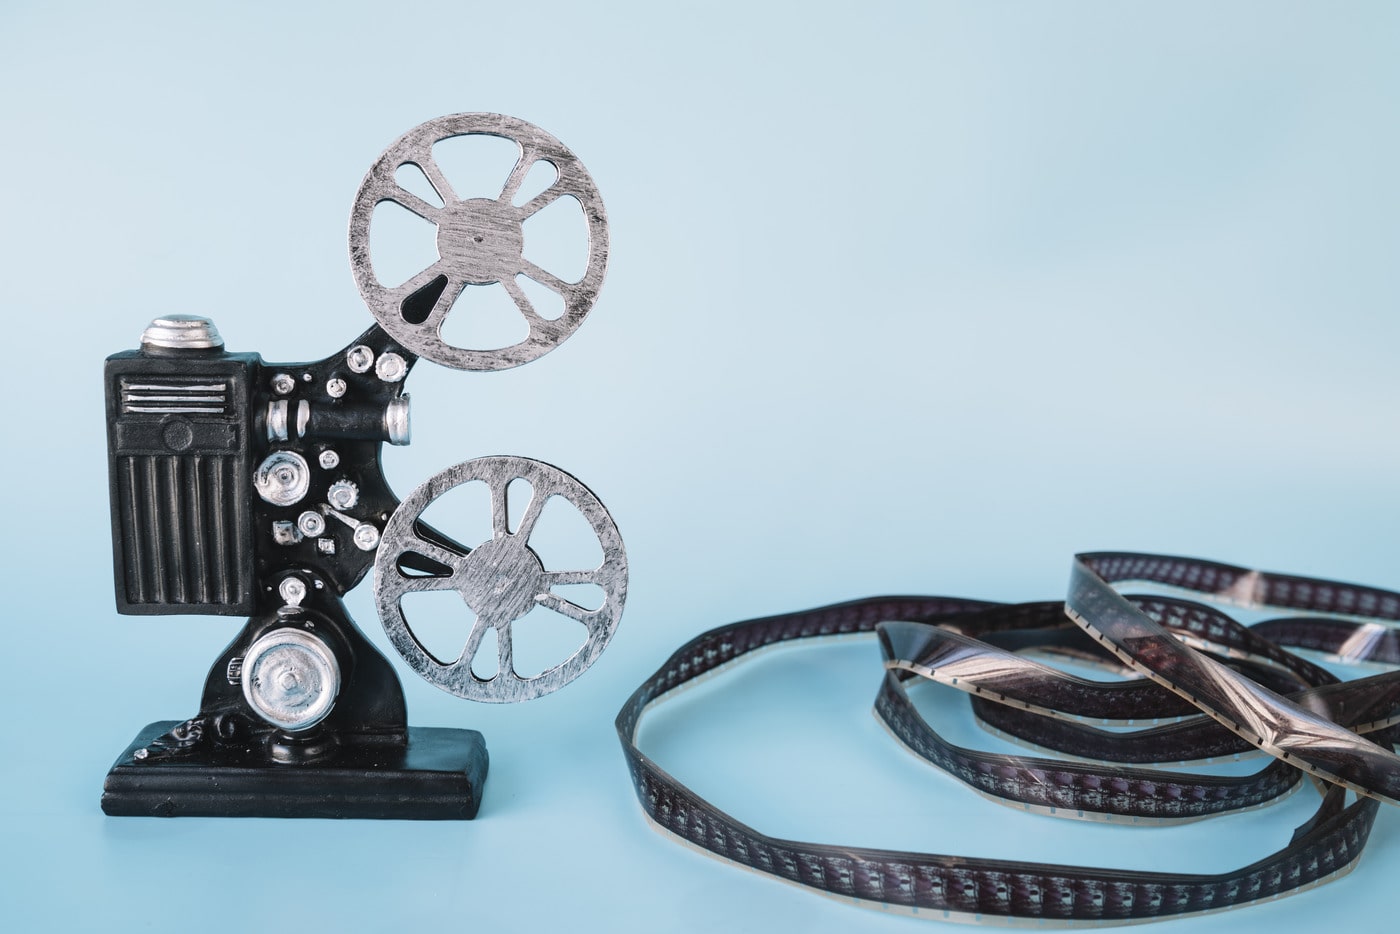 How an 8mm Movie Projector Works: What You Need to Know